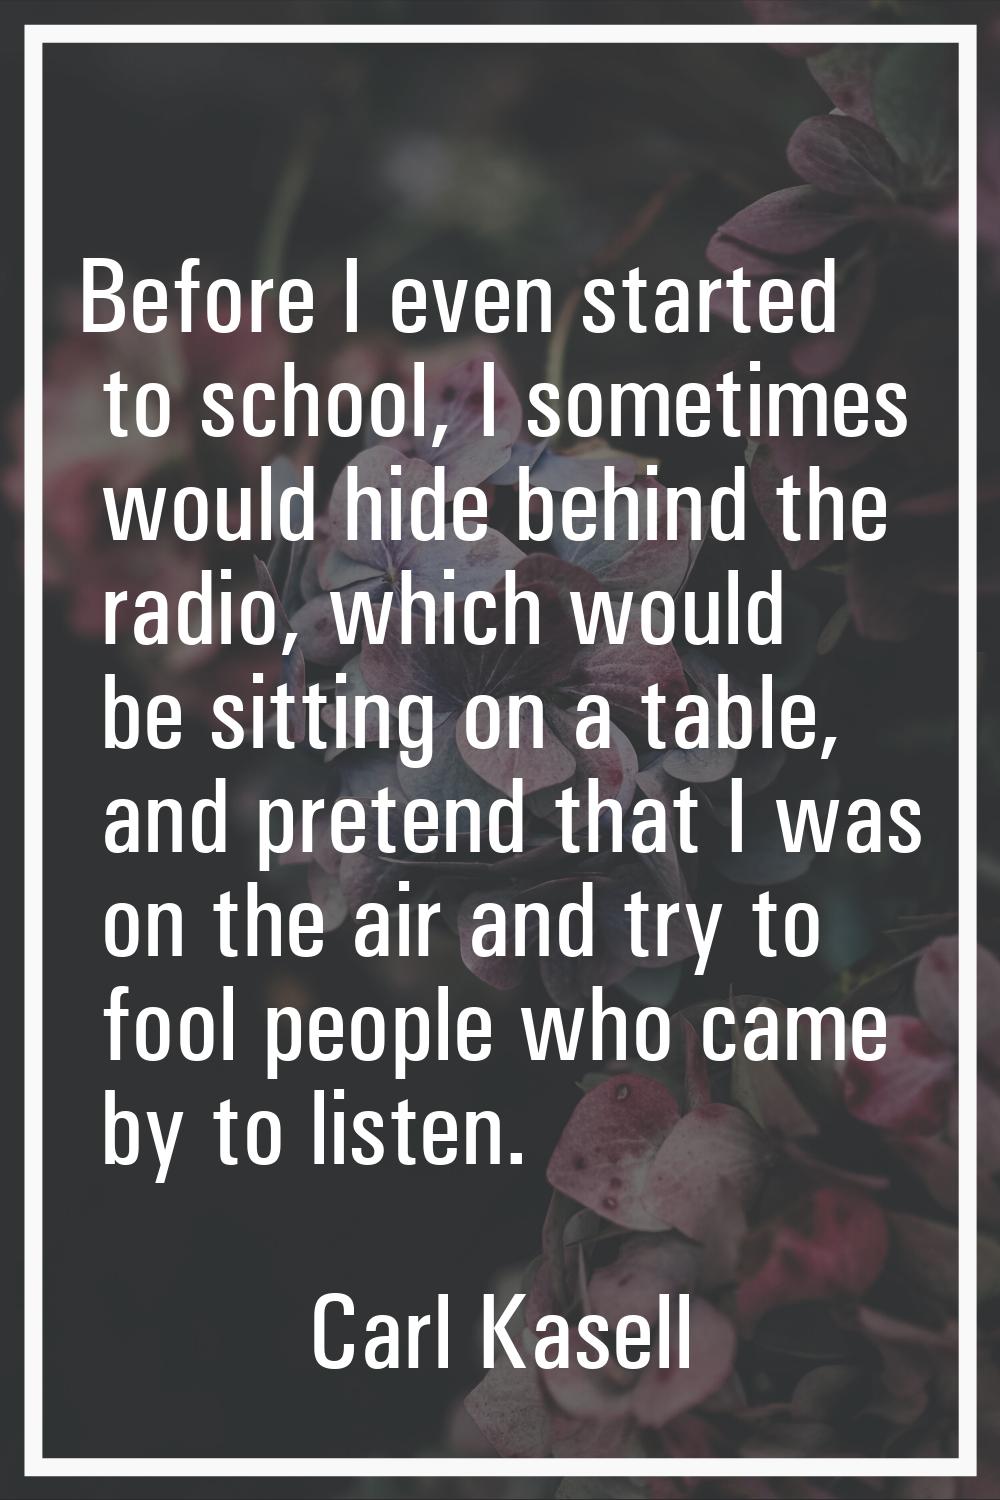 Before I even started to school, I sometimes would hide behind the radio, which would be sitting on